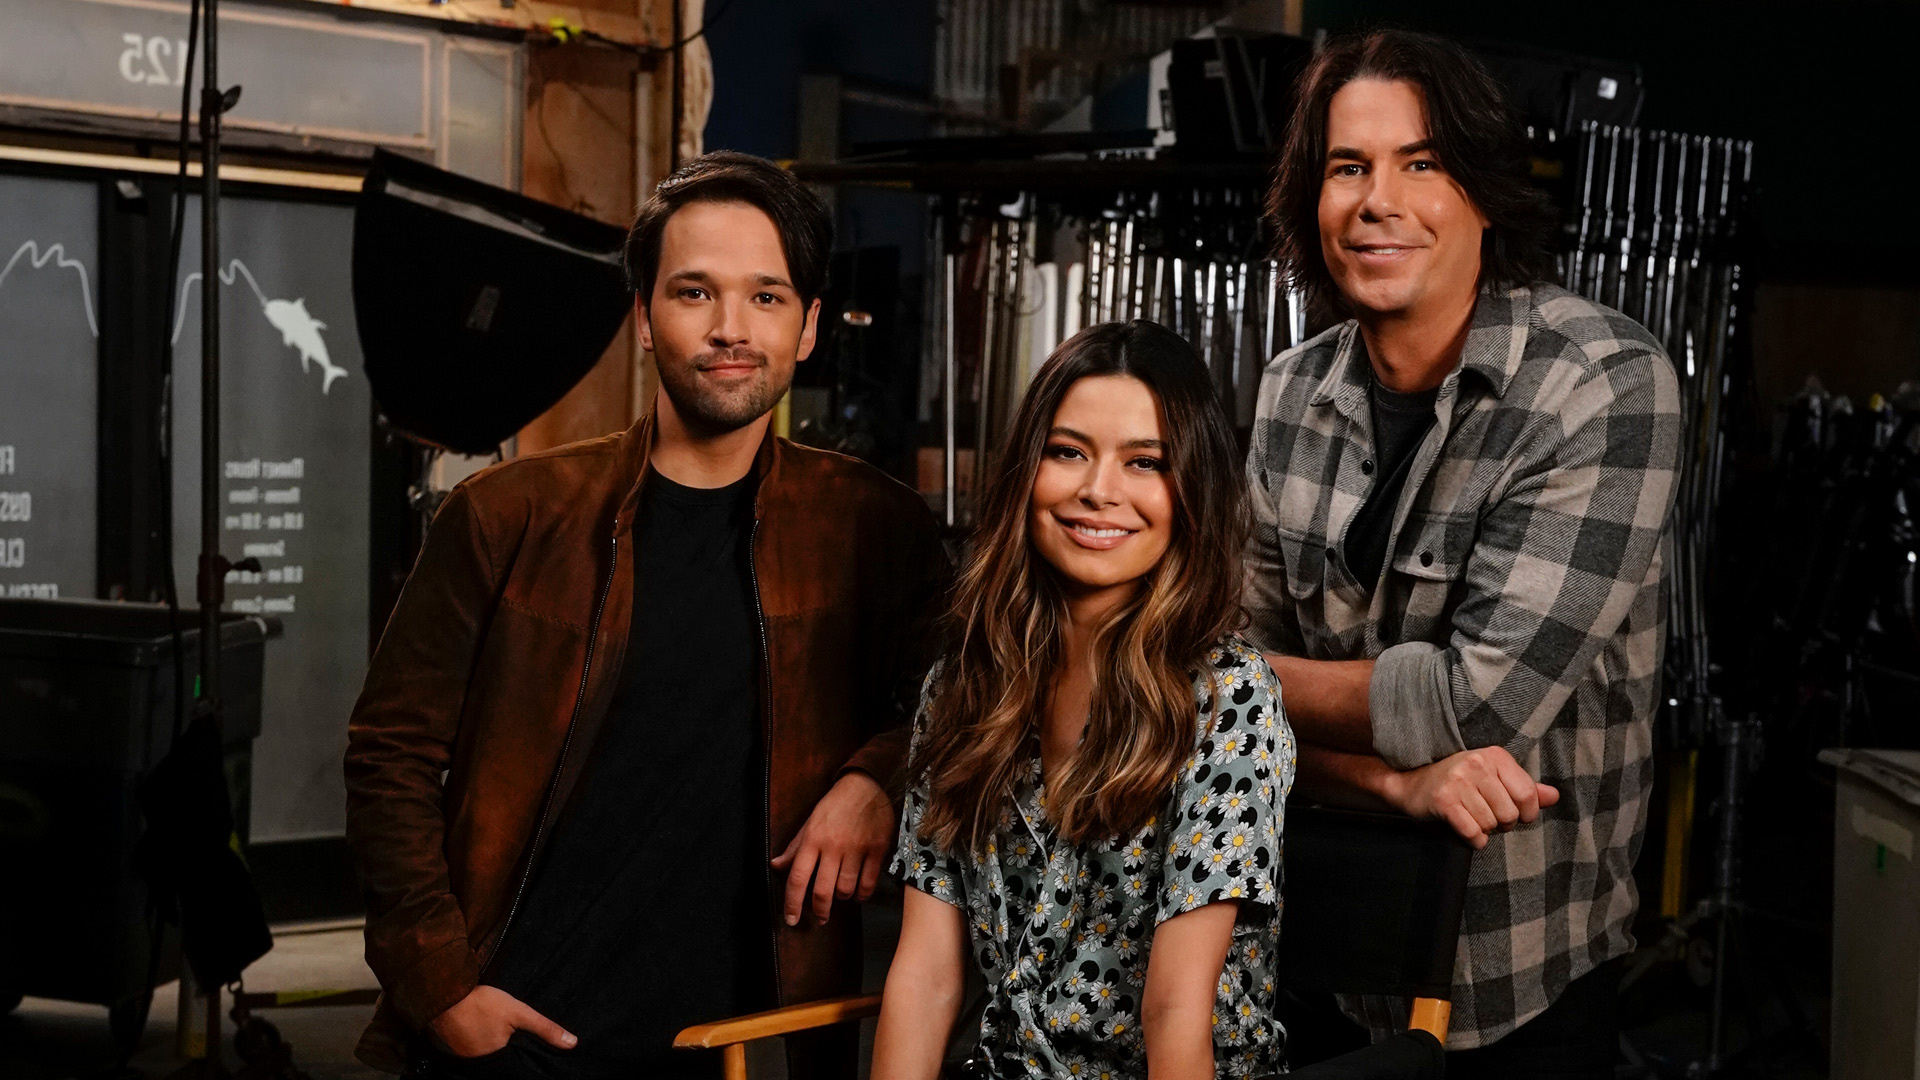 iCarly TV show, 2021 comeback, Youth series revival, 1920x1080 Full HD Desktop